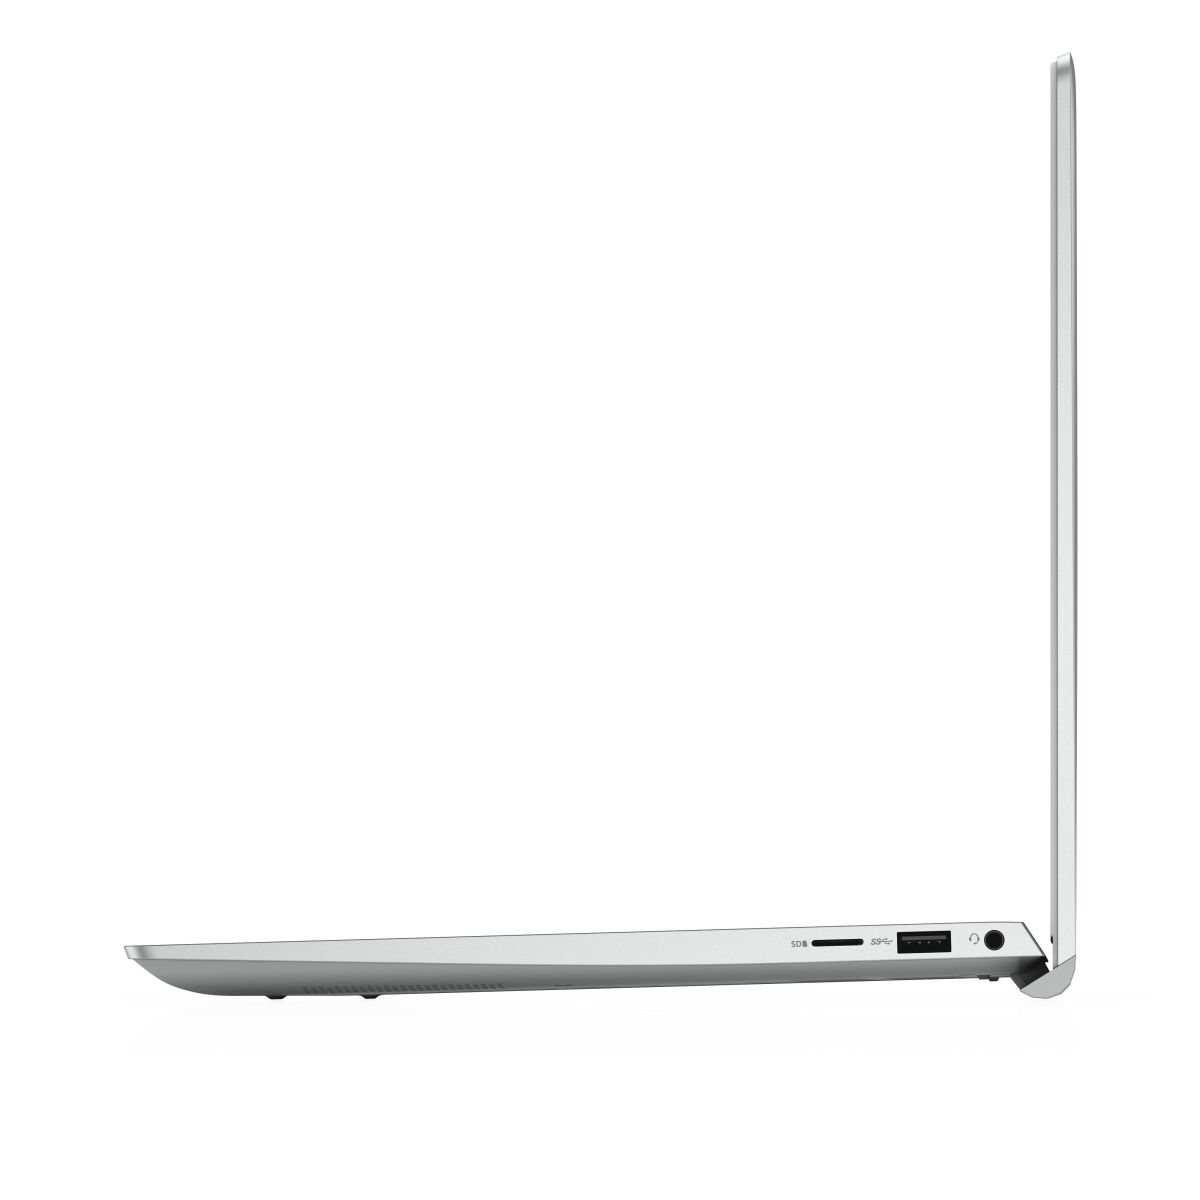 DELL Inspiron 5405 - 5405-2736 laptop specifications